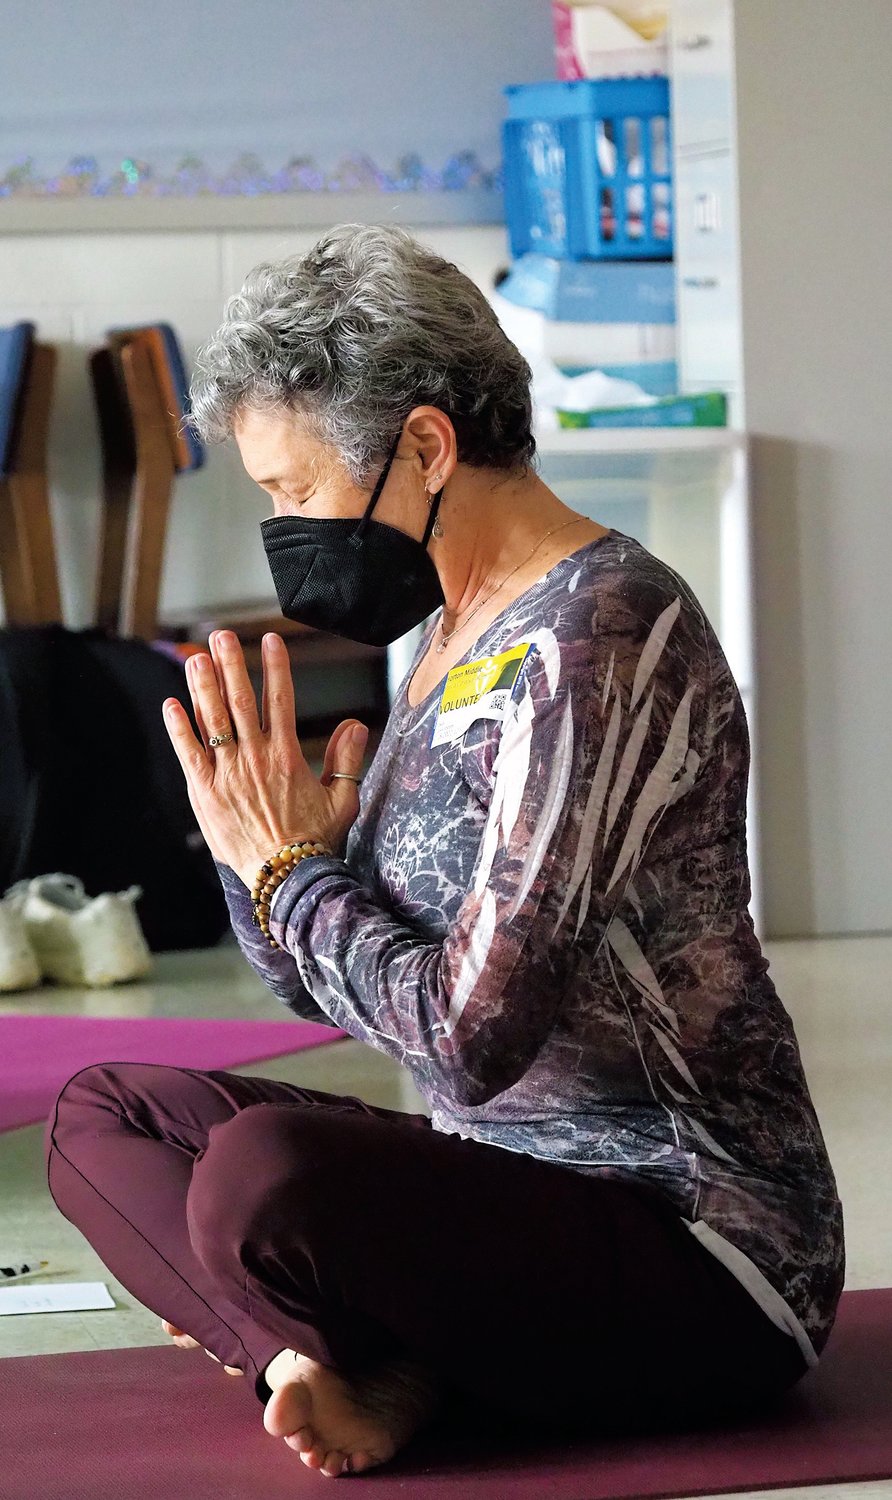 Instructor Marcia Cordova-Roth ends the class in a simple seated position of gratitude.